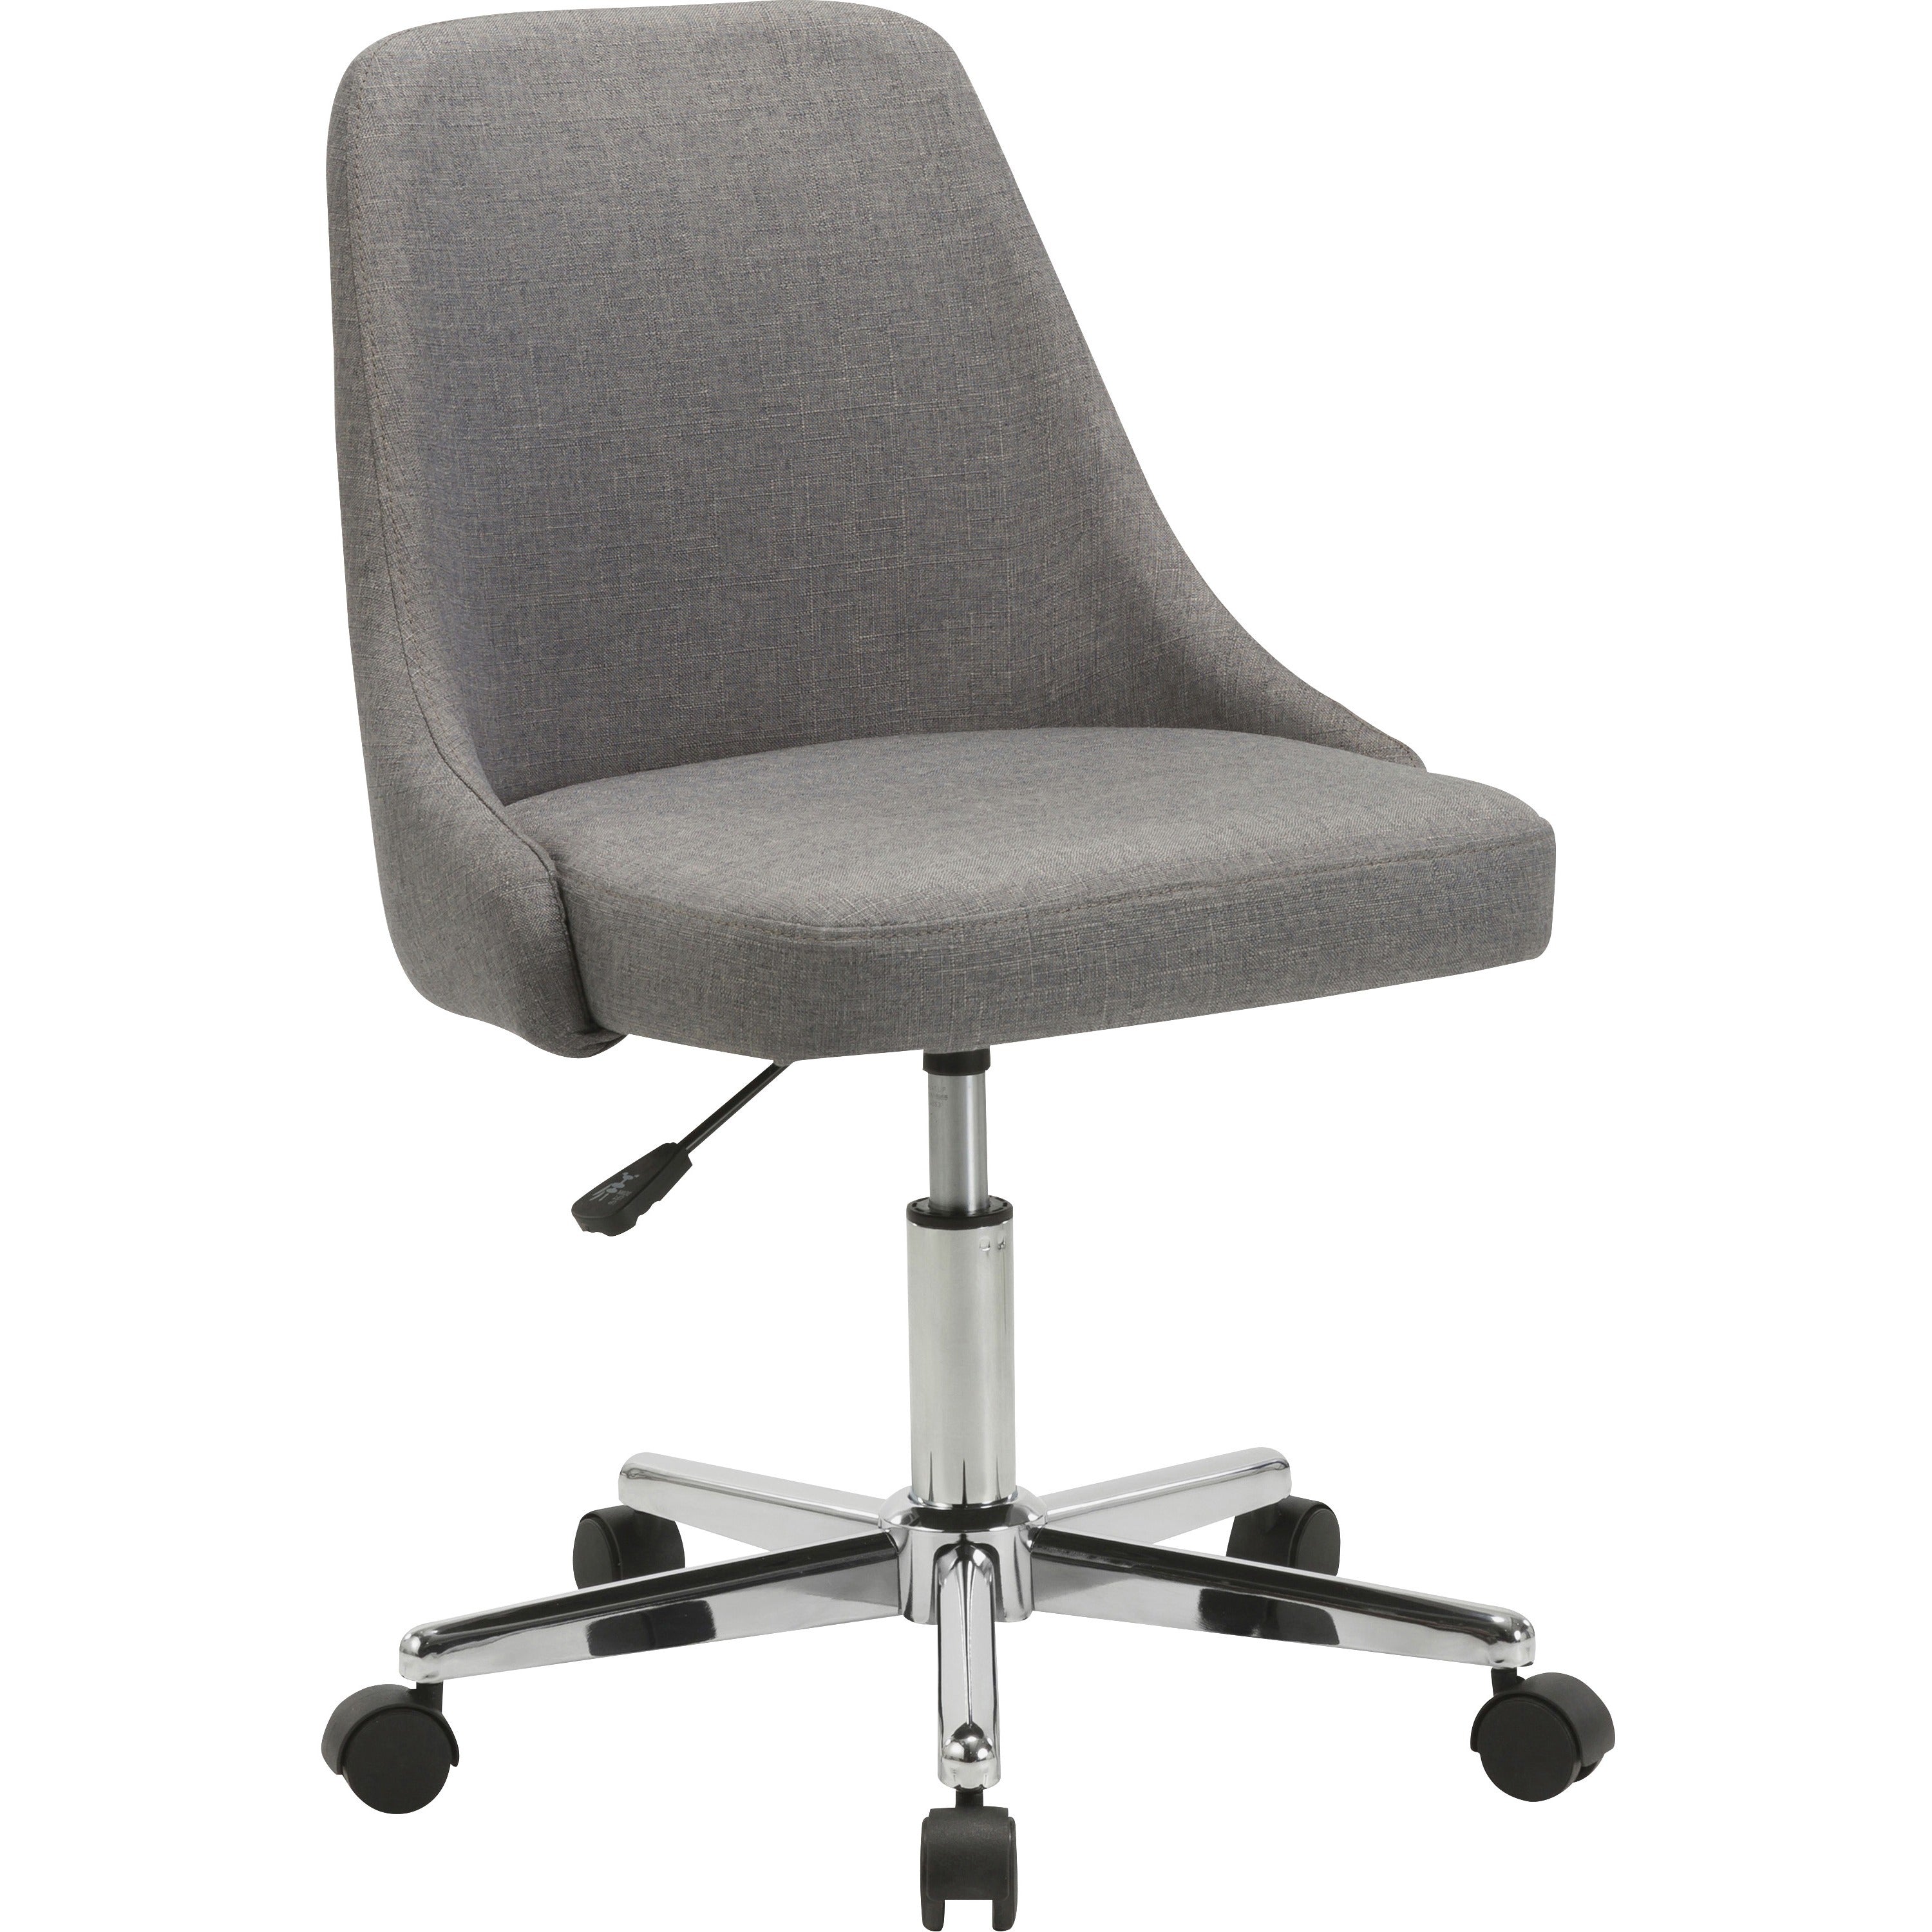 Lorell Resimercial Low-back Task Chair with Arms - 22.5" x 24.4"31.5" - Material: Fabric - Finish: Gray - 1